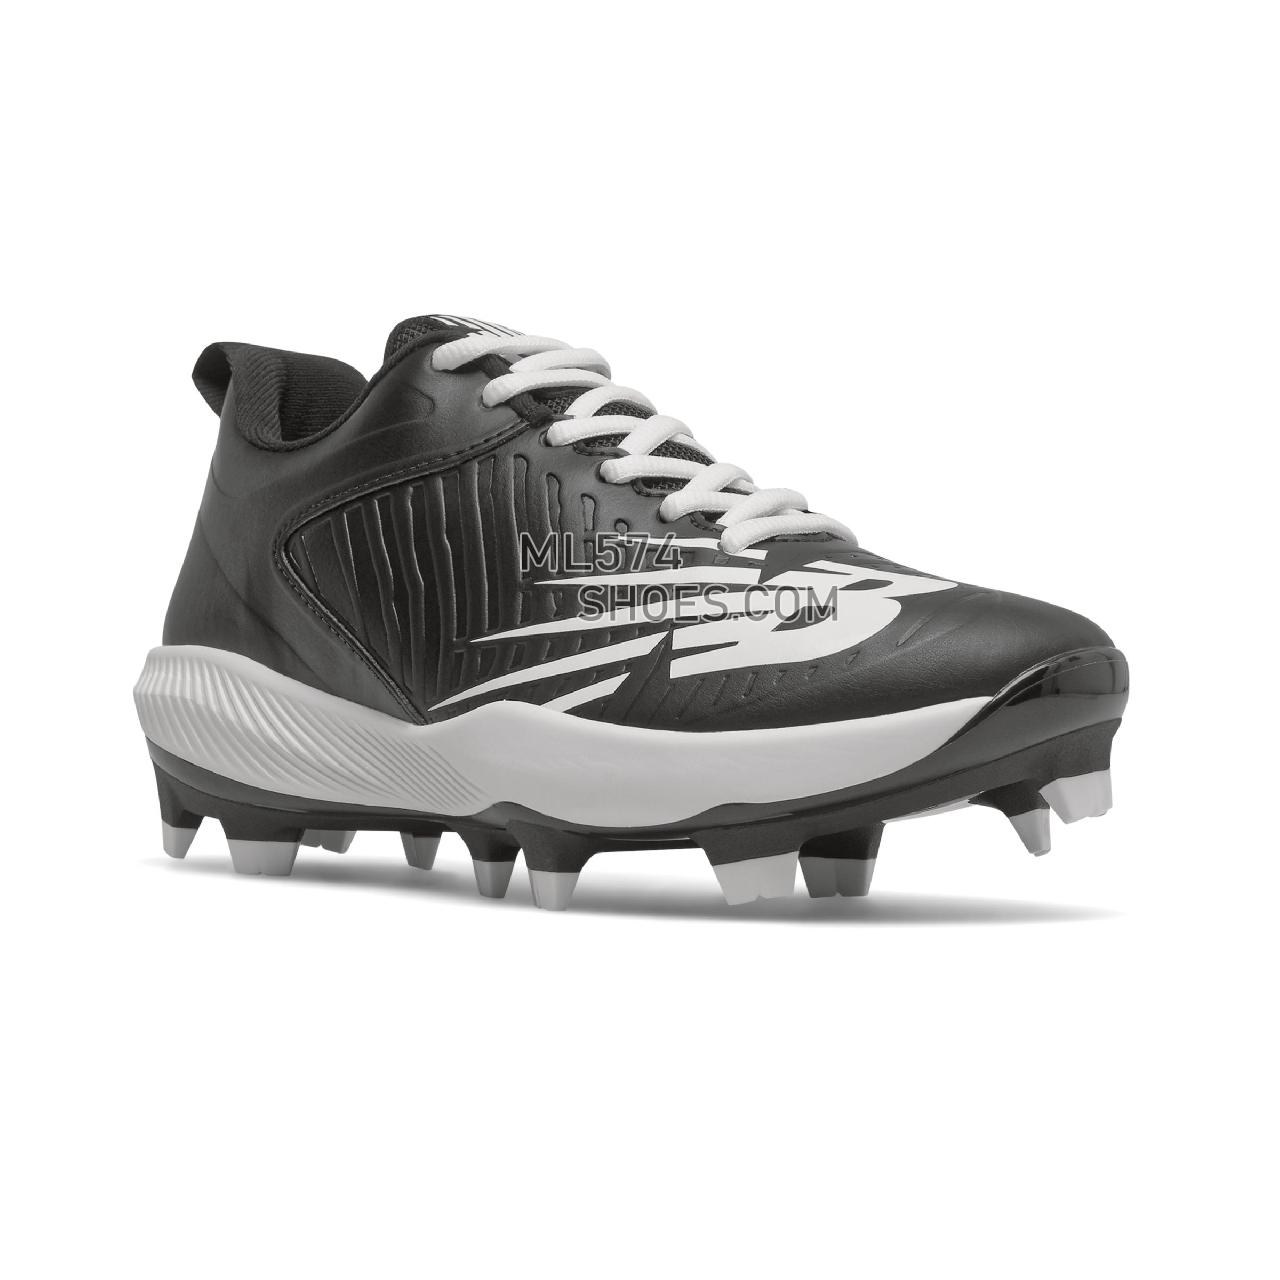 New Balance FuelCell FUSE v3 Molded - Women's Softball - Black with White - SPFUSEK3